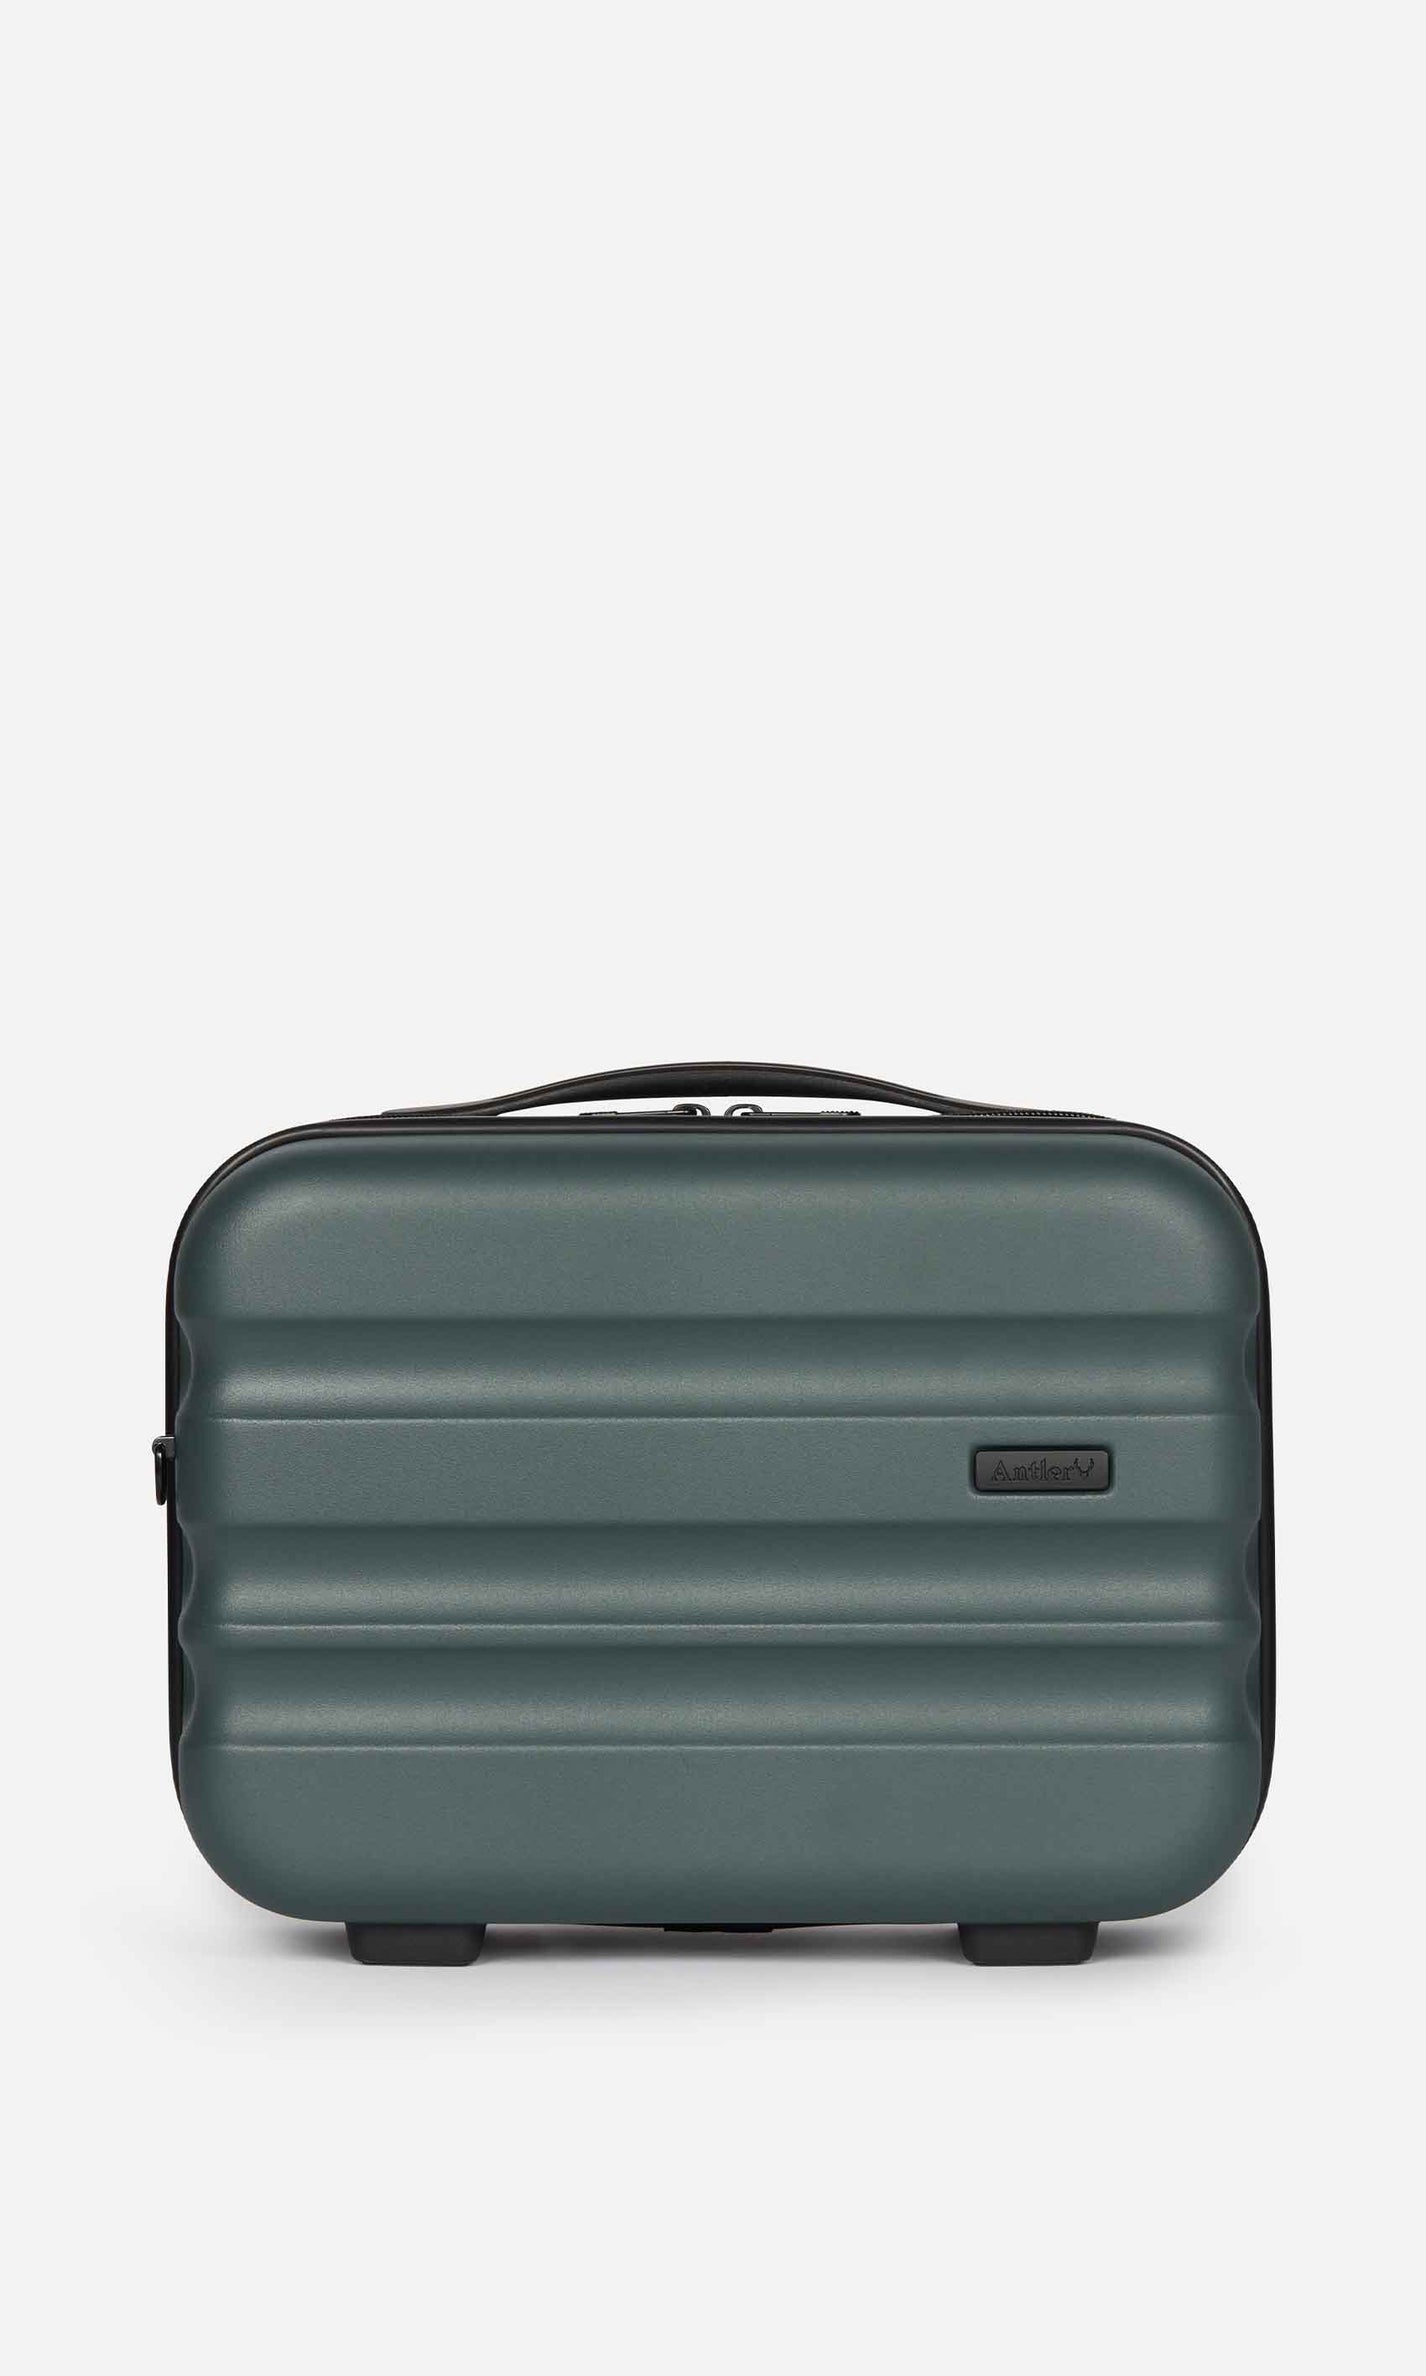 Clifton Vanity Case Sycamore (Green) | Travel Accessories & Gifts ...